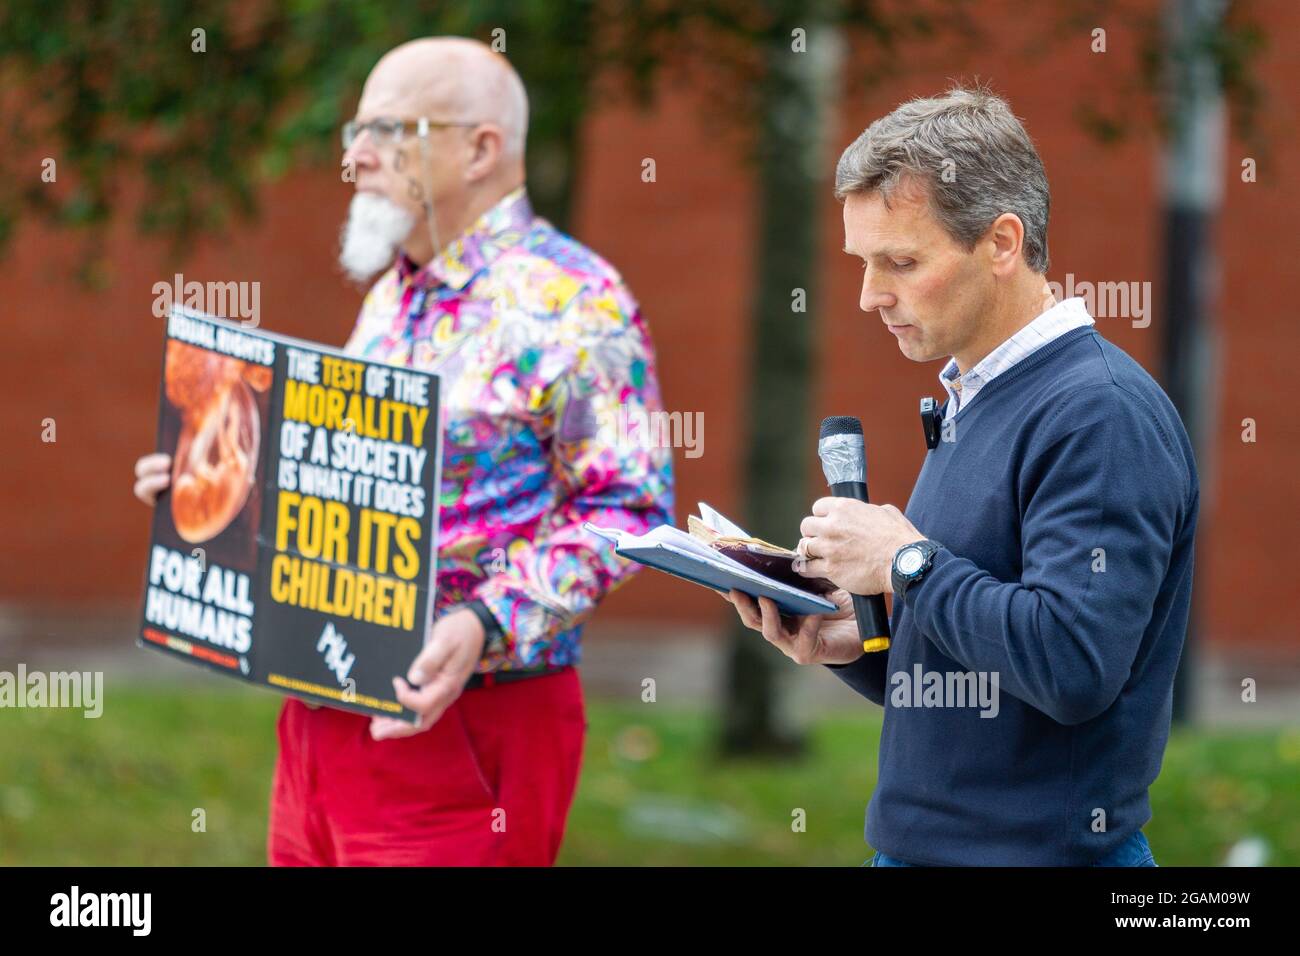 Belfast, UK. 31st July, 2021. 31/07/2021 Christian Anti-Abortion Protesters gathered at Writers Square as a Rally against Pro Abortion supporters who were there. Credit: Bonzo/Alamy Live News Stock Photo